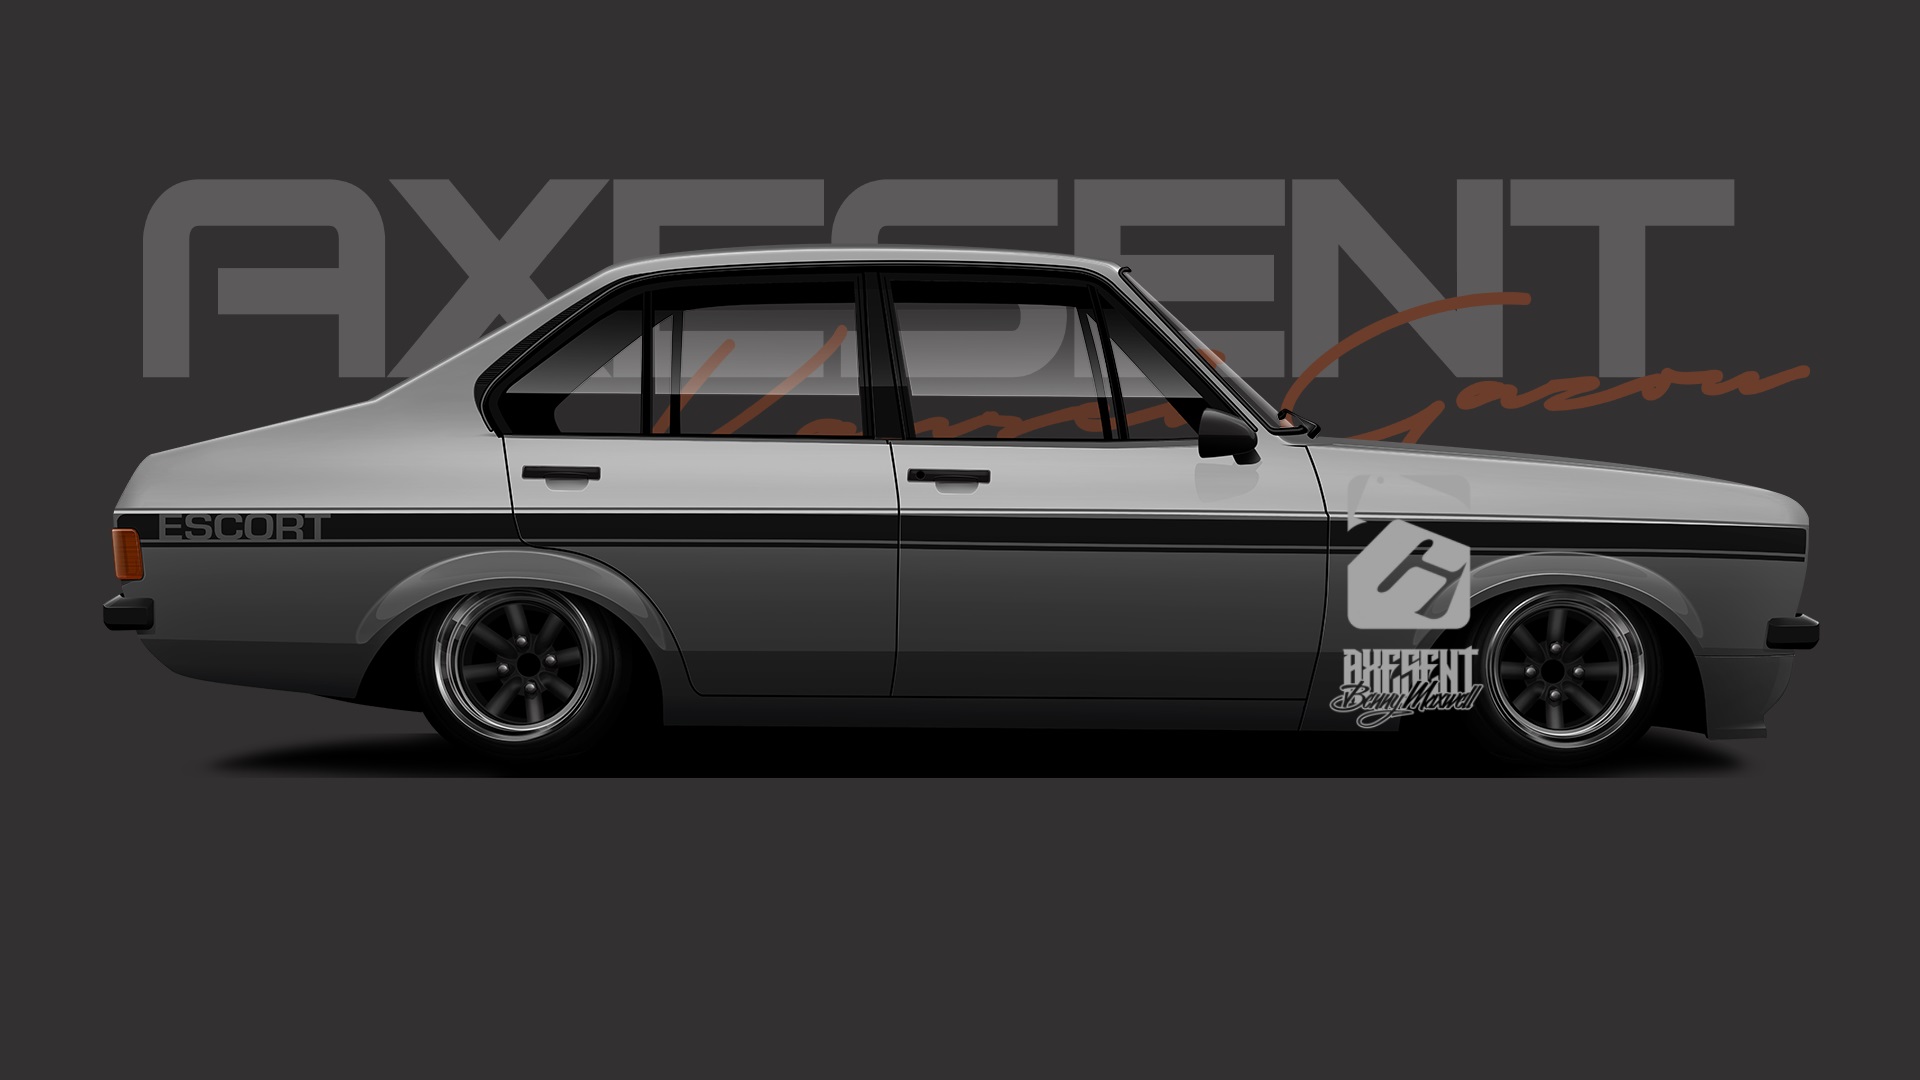 Axesent Creations Render Ford Escort Mkii Ford British Cars Side View Silver Cars 1920x1080